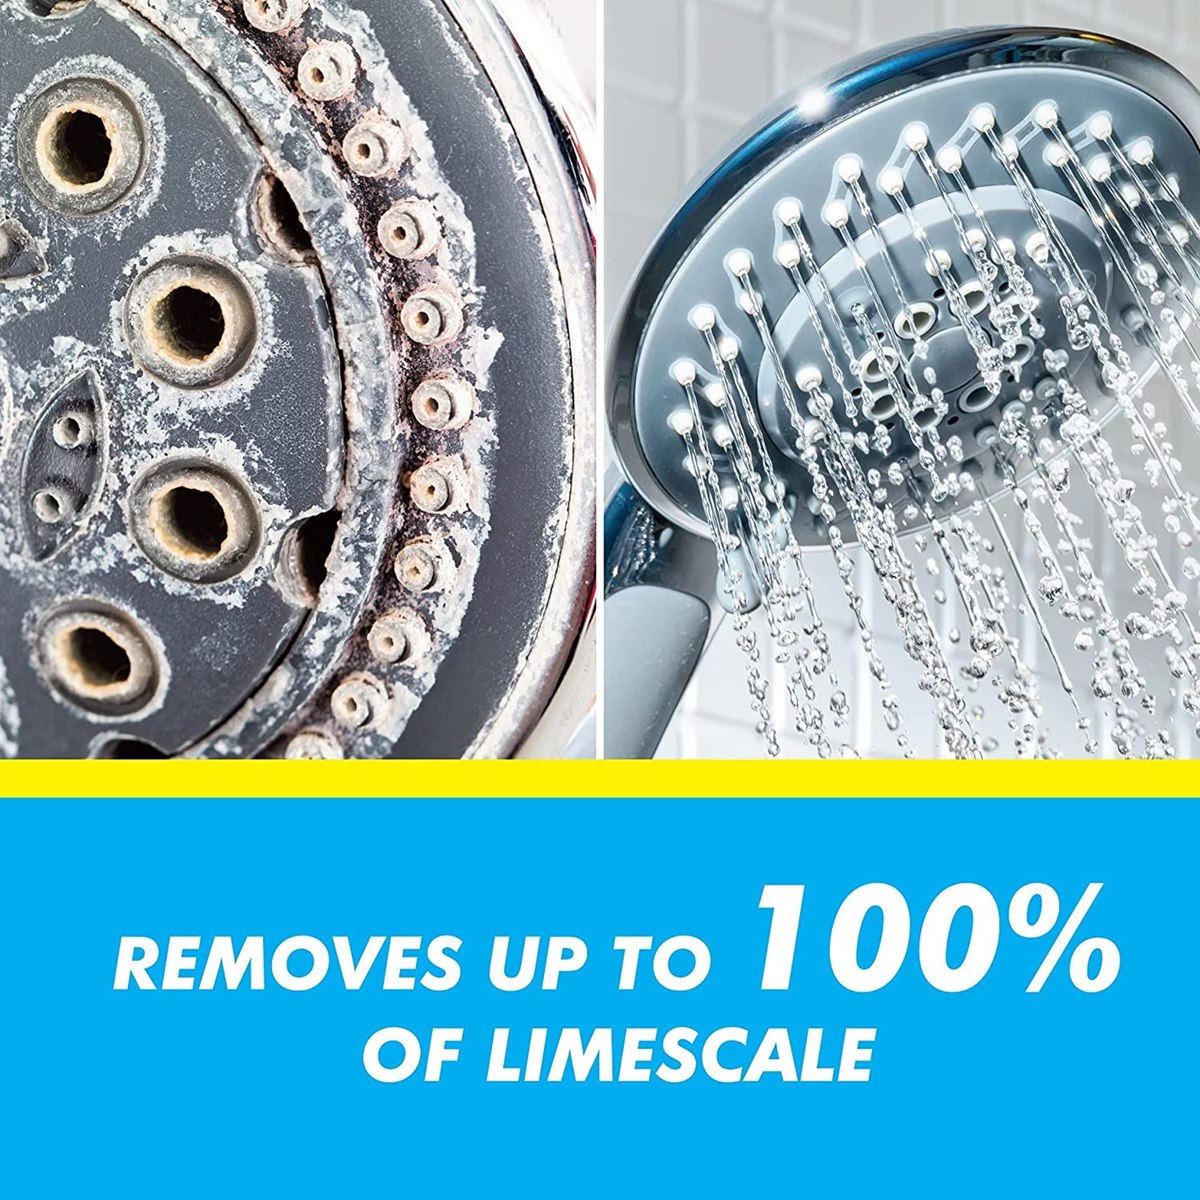 How to Remover limescale from Showerheads